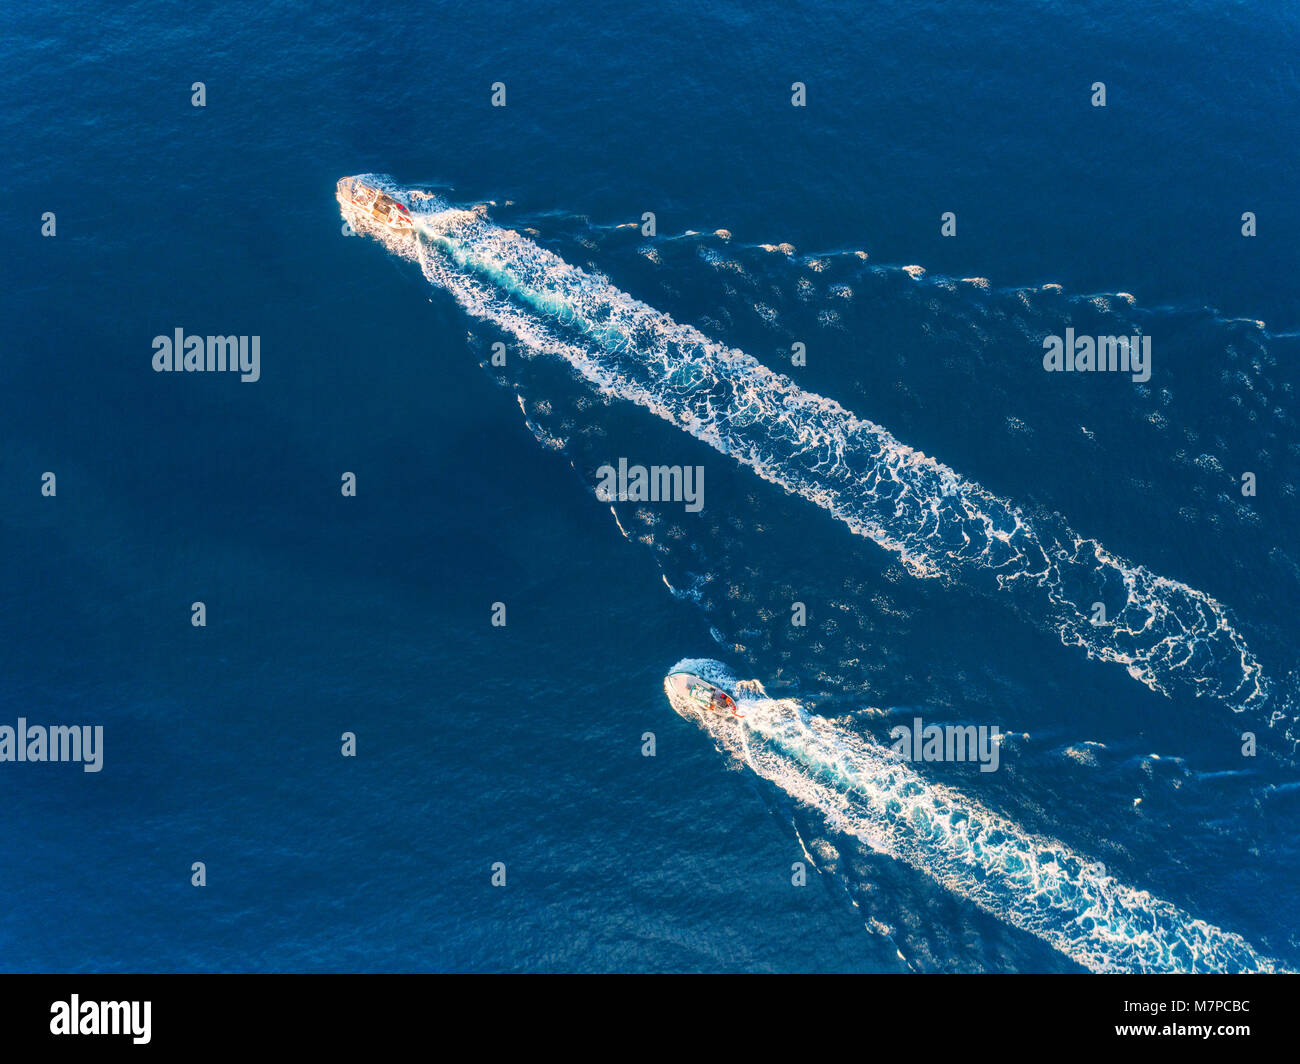 Yacht at the sea. Aerial view of luxury floating ship at sunset. Colorful landscape with boat in marina bay, blue sea. Top view from drone of yacht. L Stock Photo